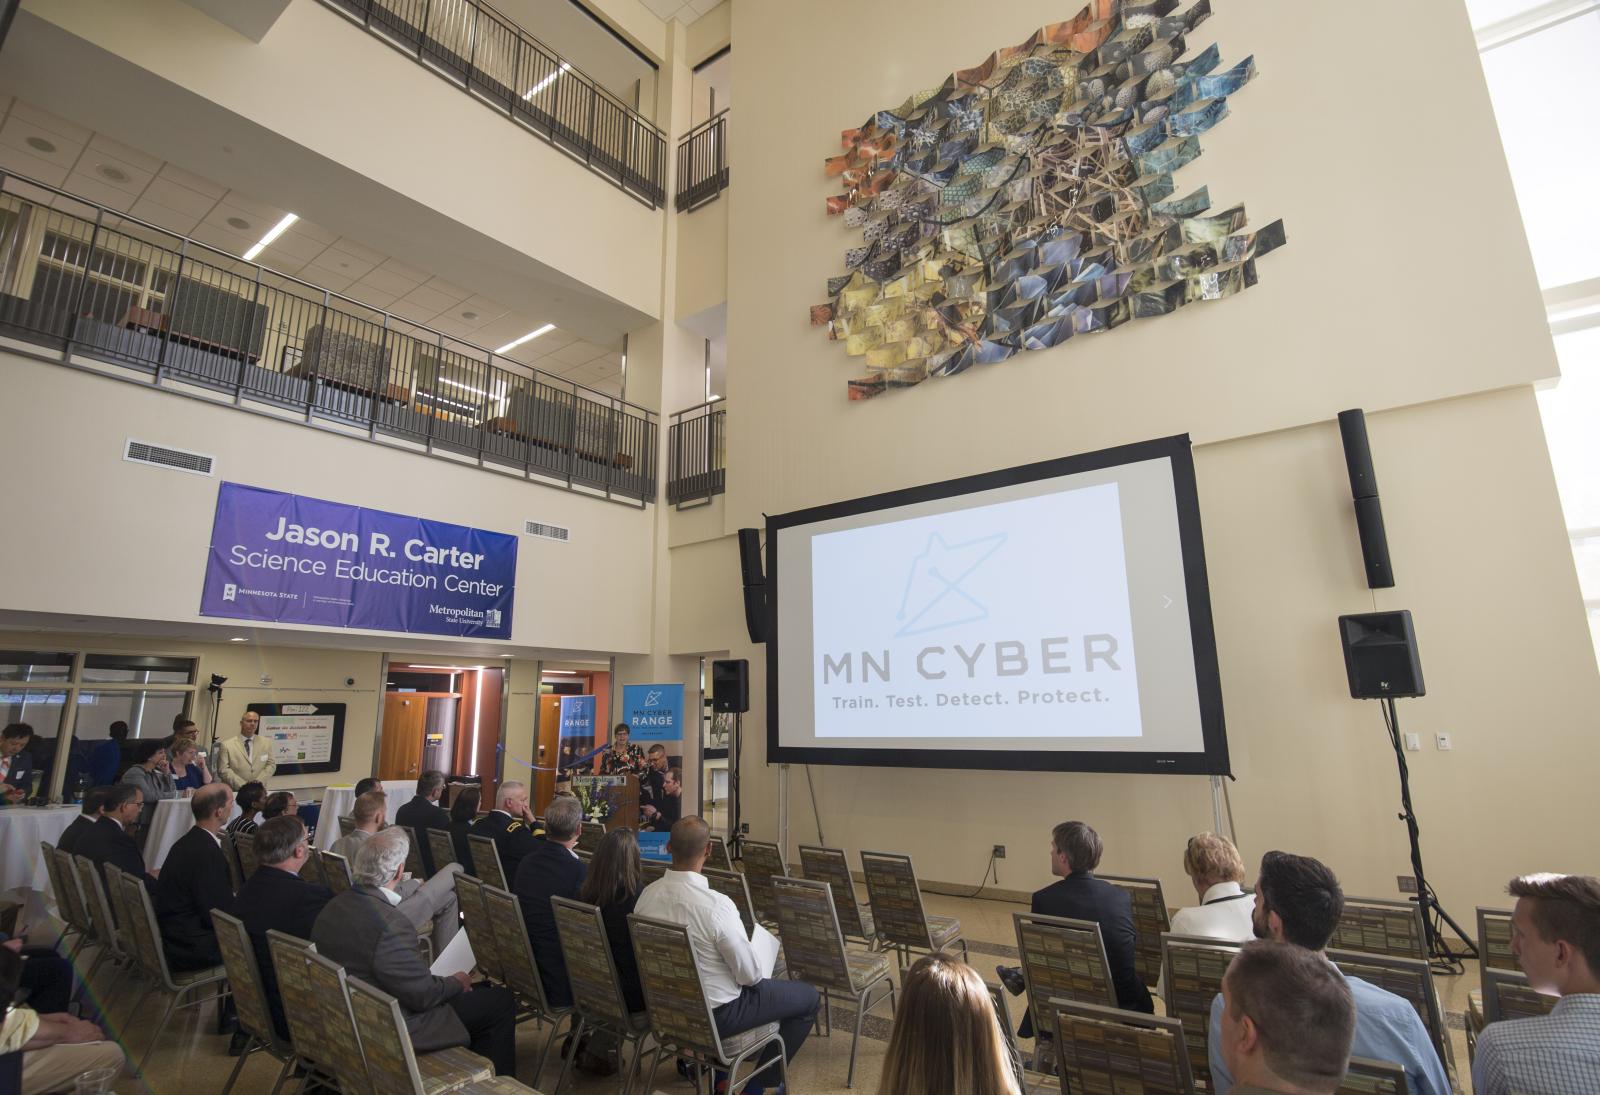 MN Cyber opens premier regional training facility for cybersecurity professionals at Metropolitan State University